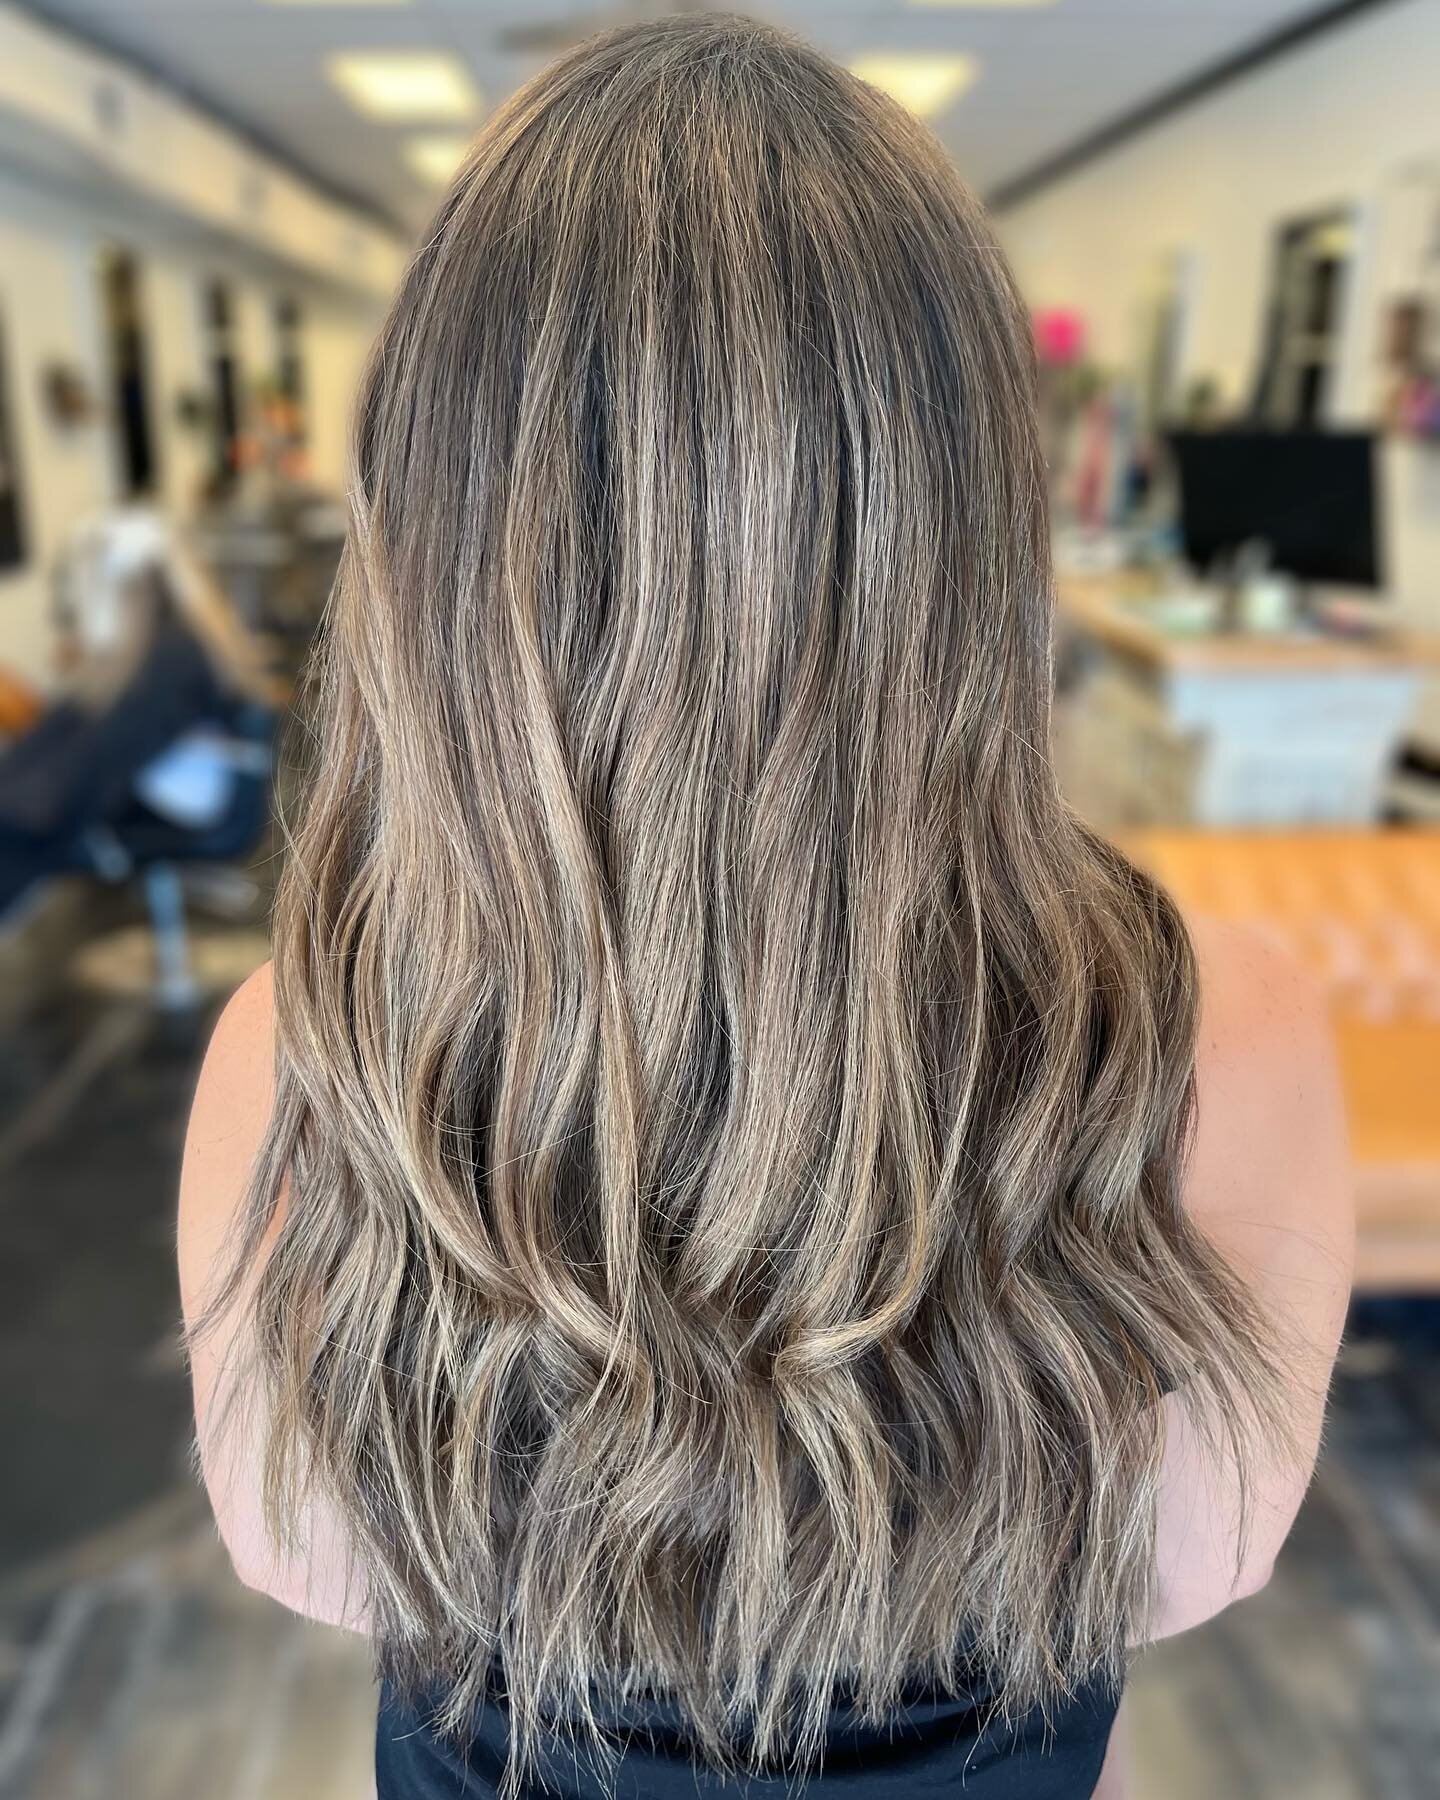 🔥It's still blazing outside, but fall is coming🍂

I Brought up my guest's balayage with #redkinflashlift and cooled her out with #shadeseq 

✨Hair by Courtney Riley✨